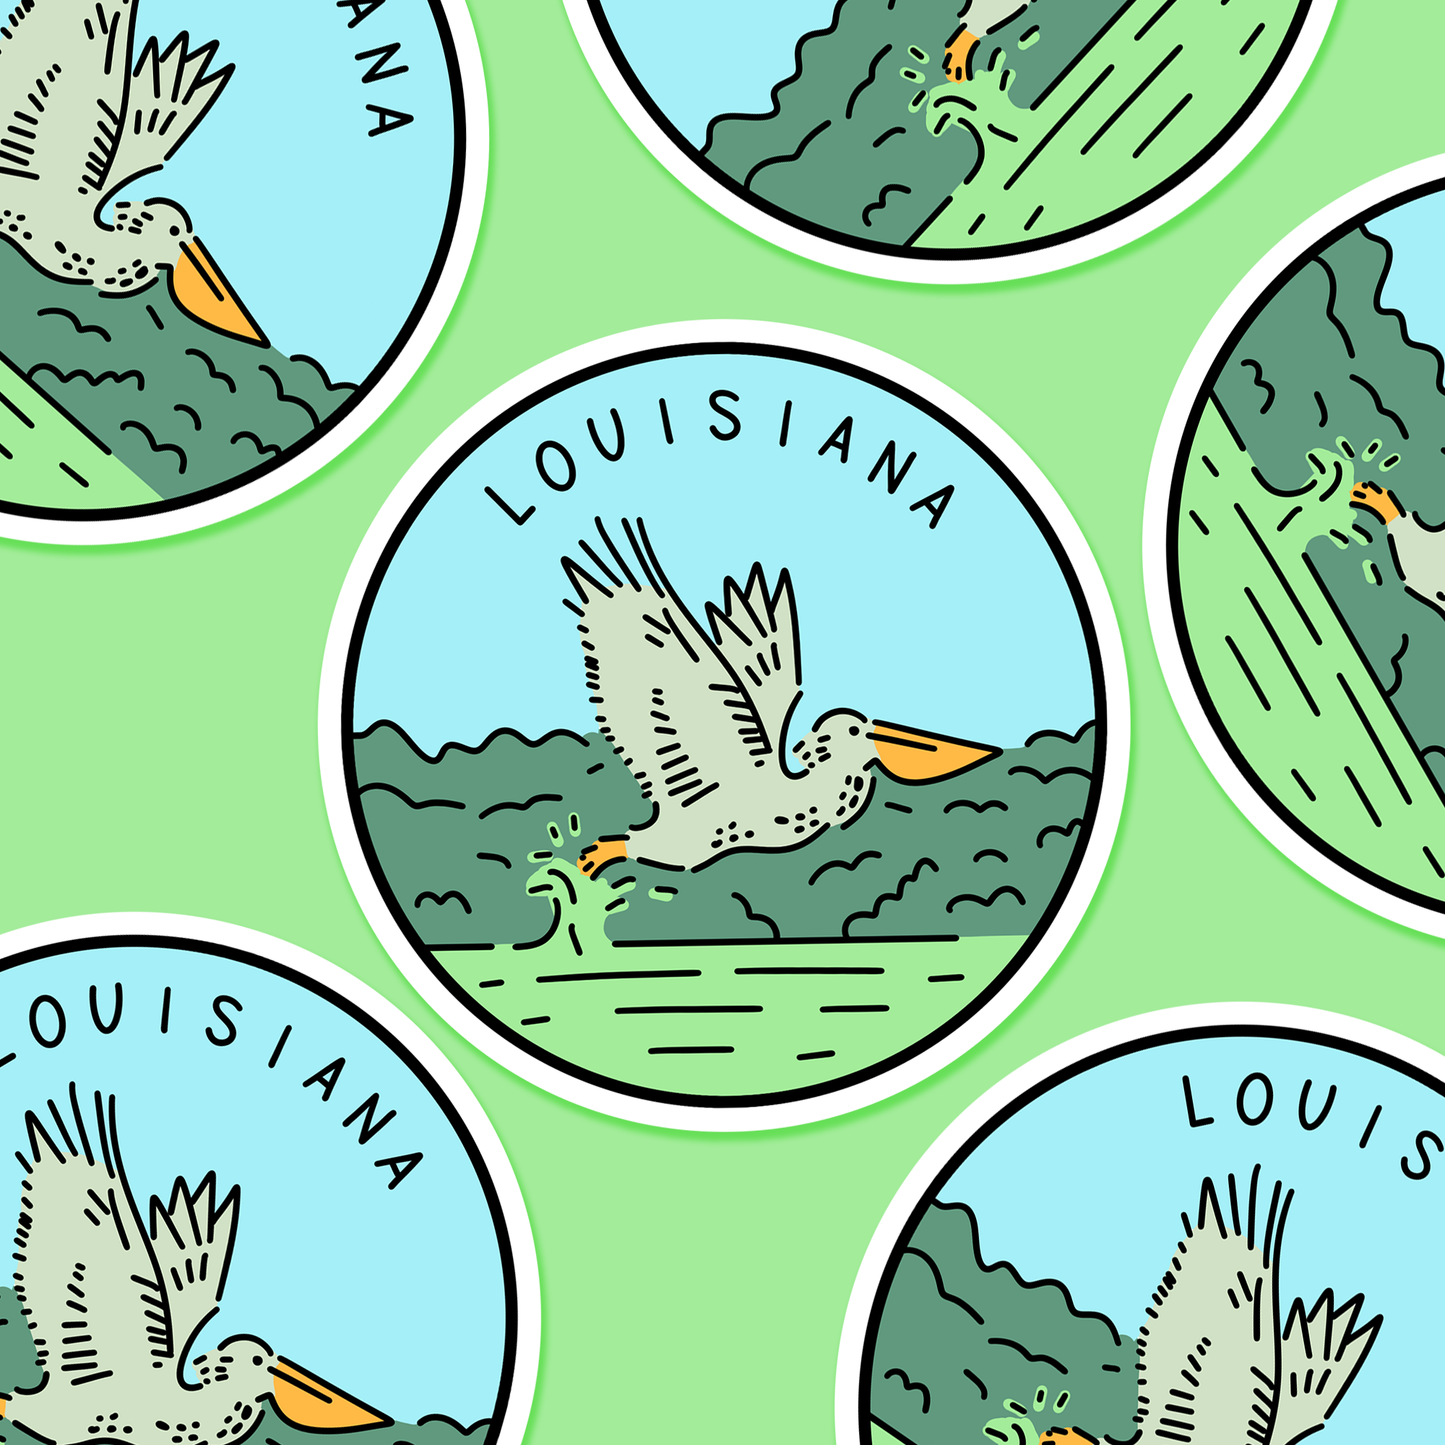 Louisiana Illustrated US State 3 x 3 in - Travel Sticker